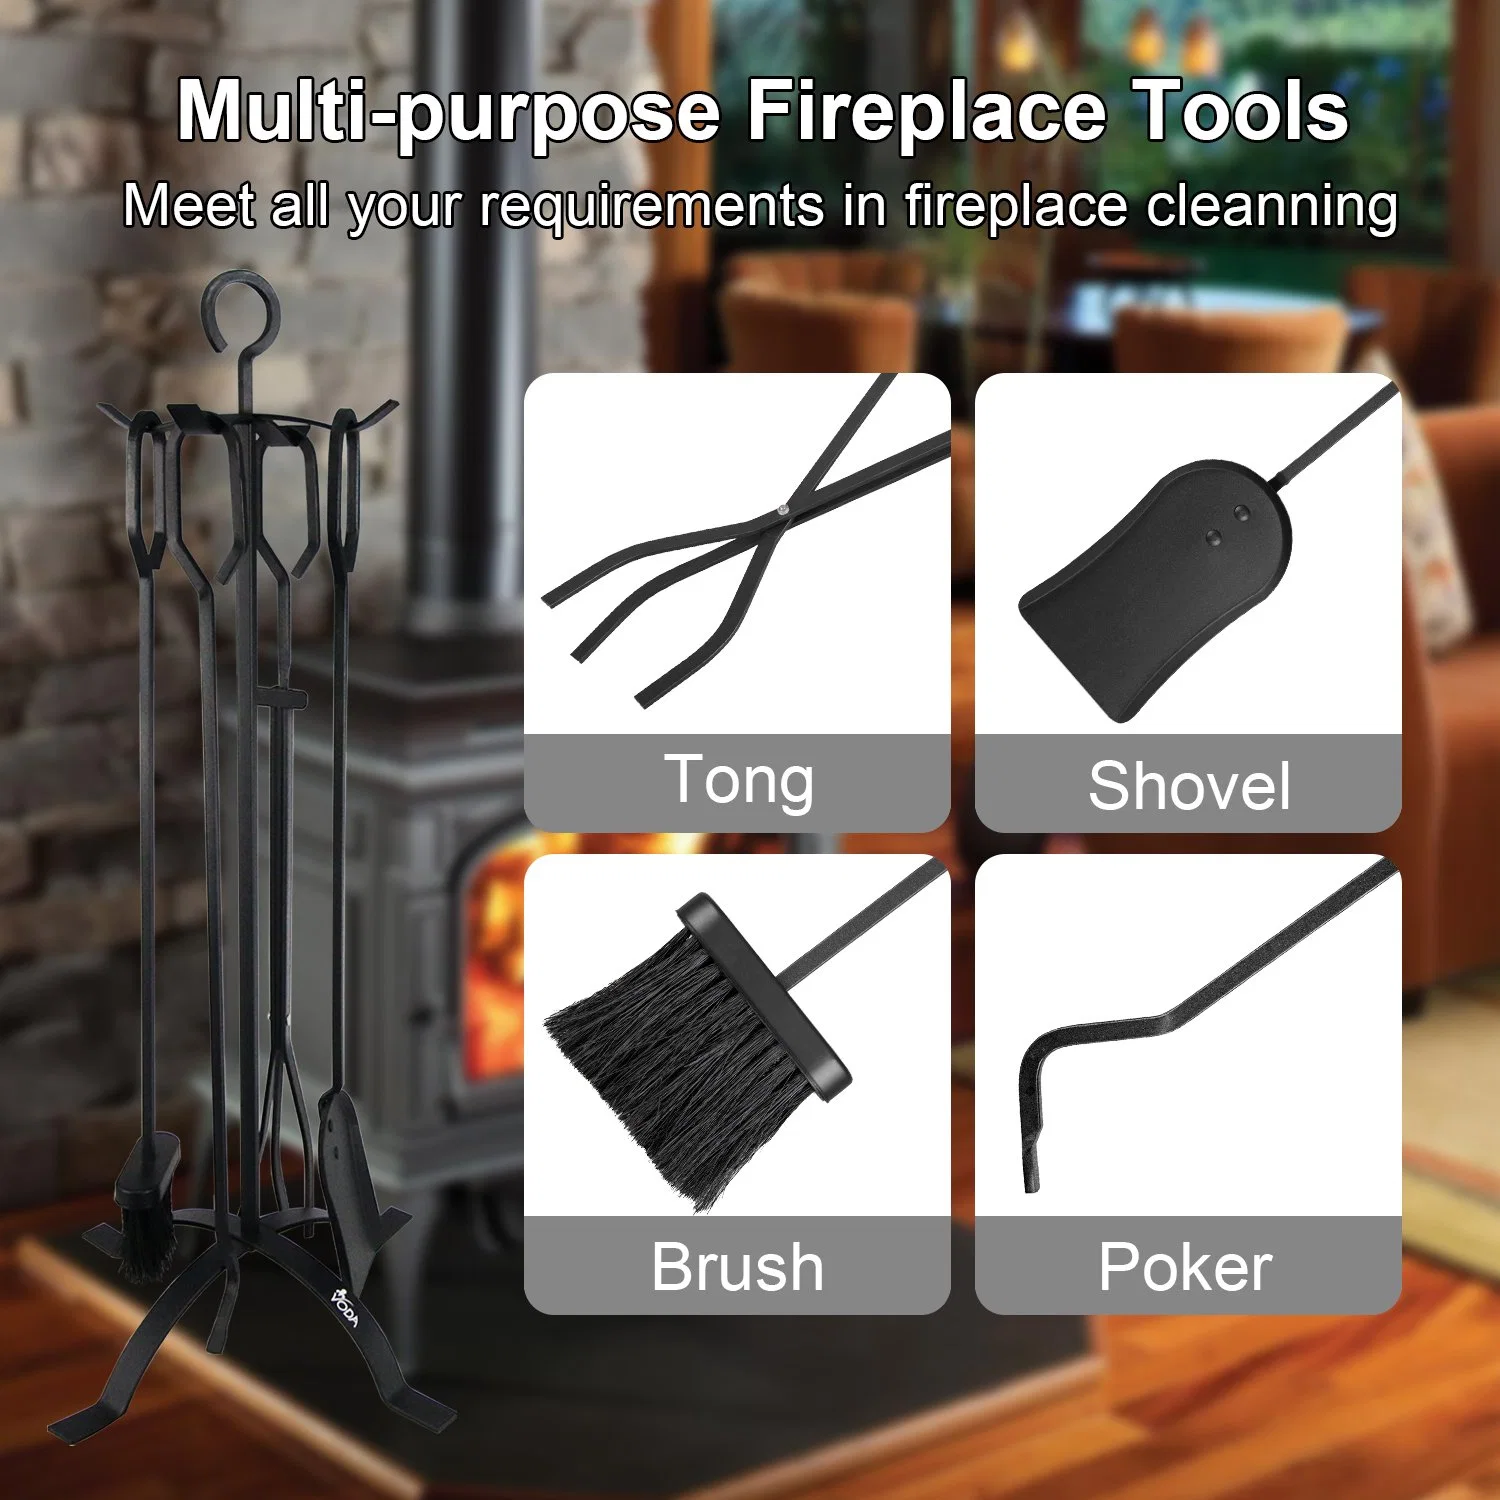 New Fire 5 Pieces Fireplace Tools Sets Fireplace Accessories Tools Holder with Handles Tools for Indoor Fireplace Decor Outdoor Fire Pit Modern Tool